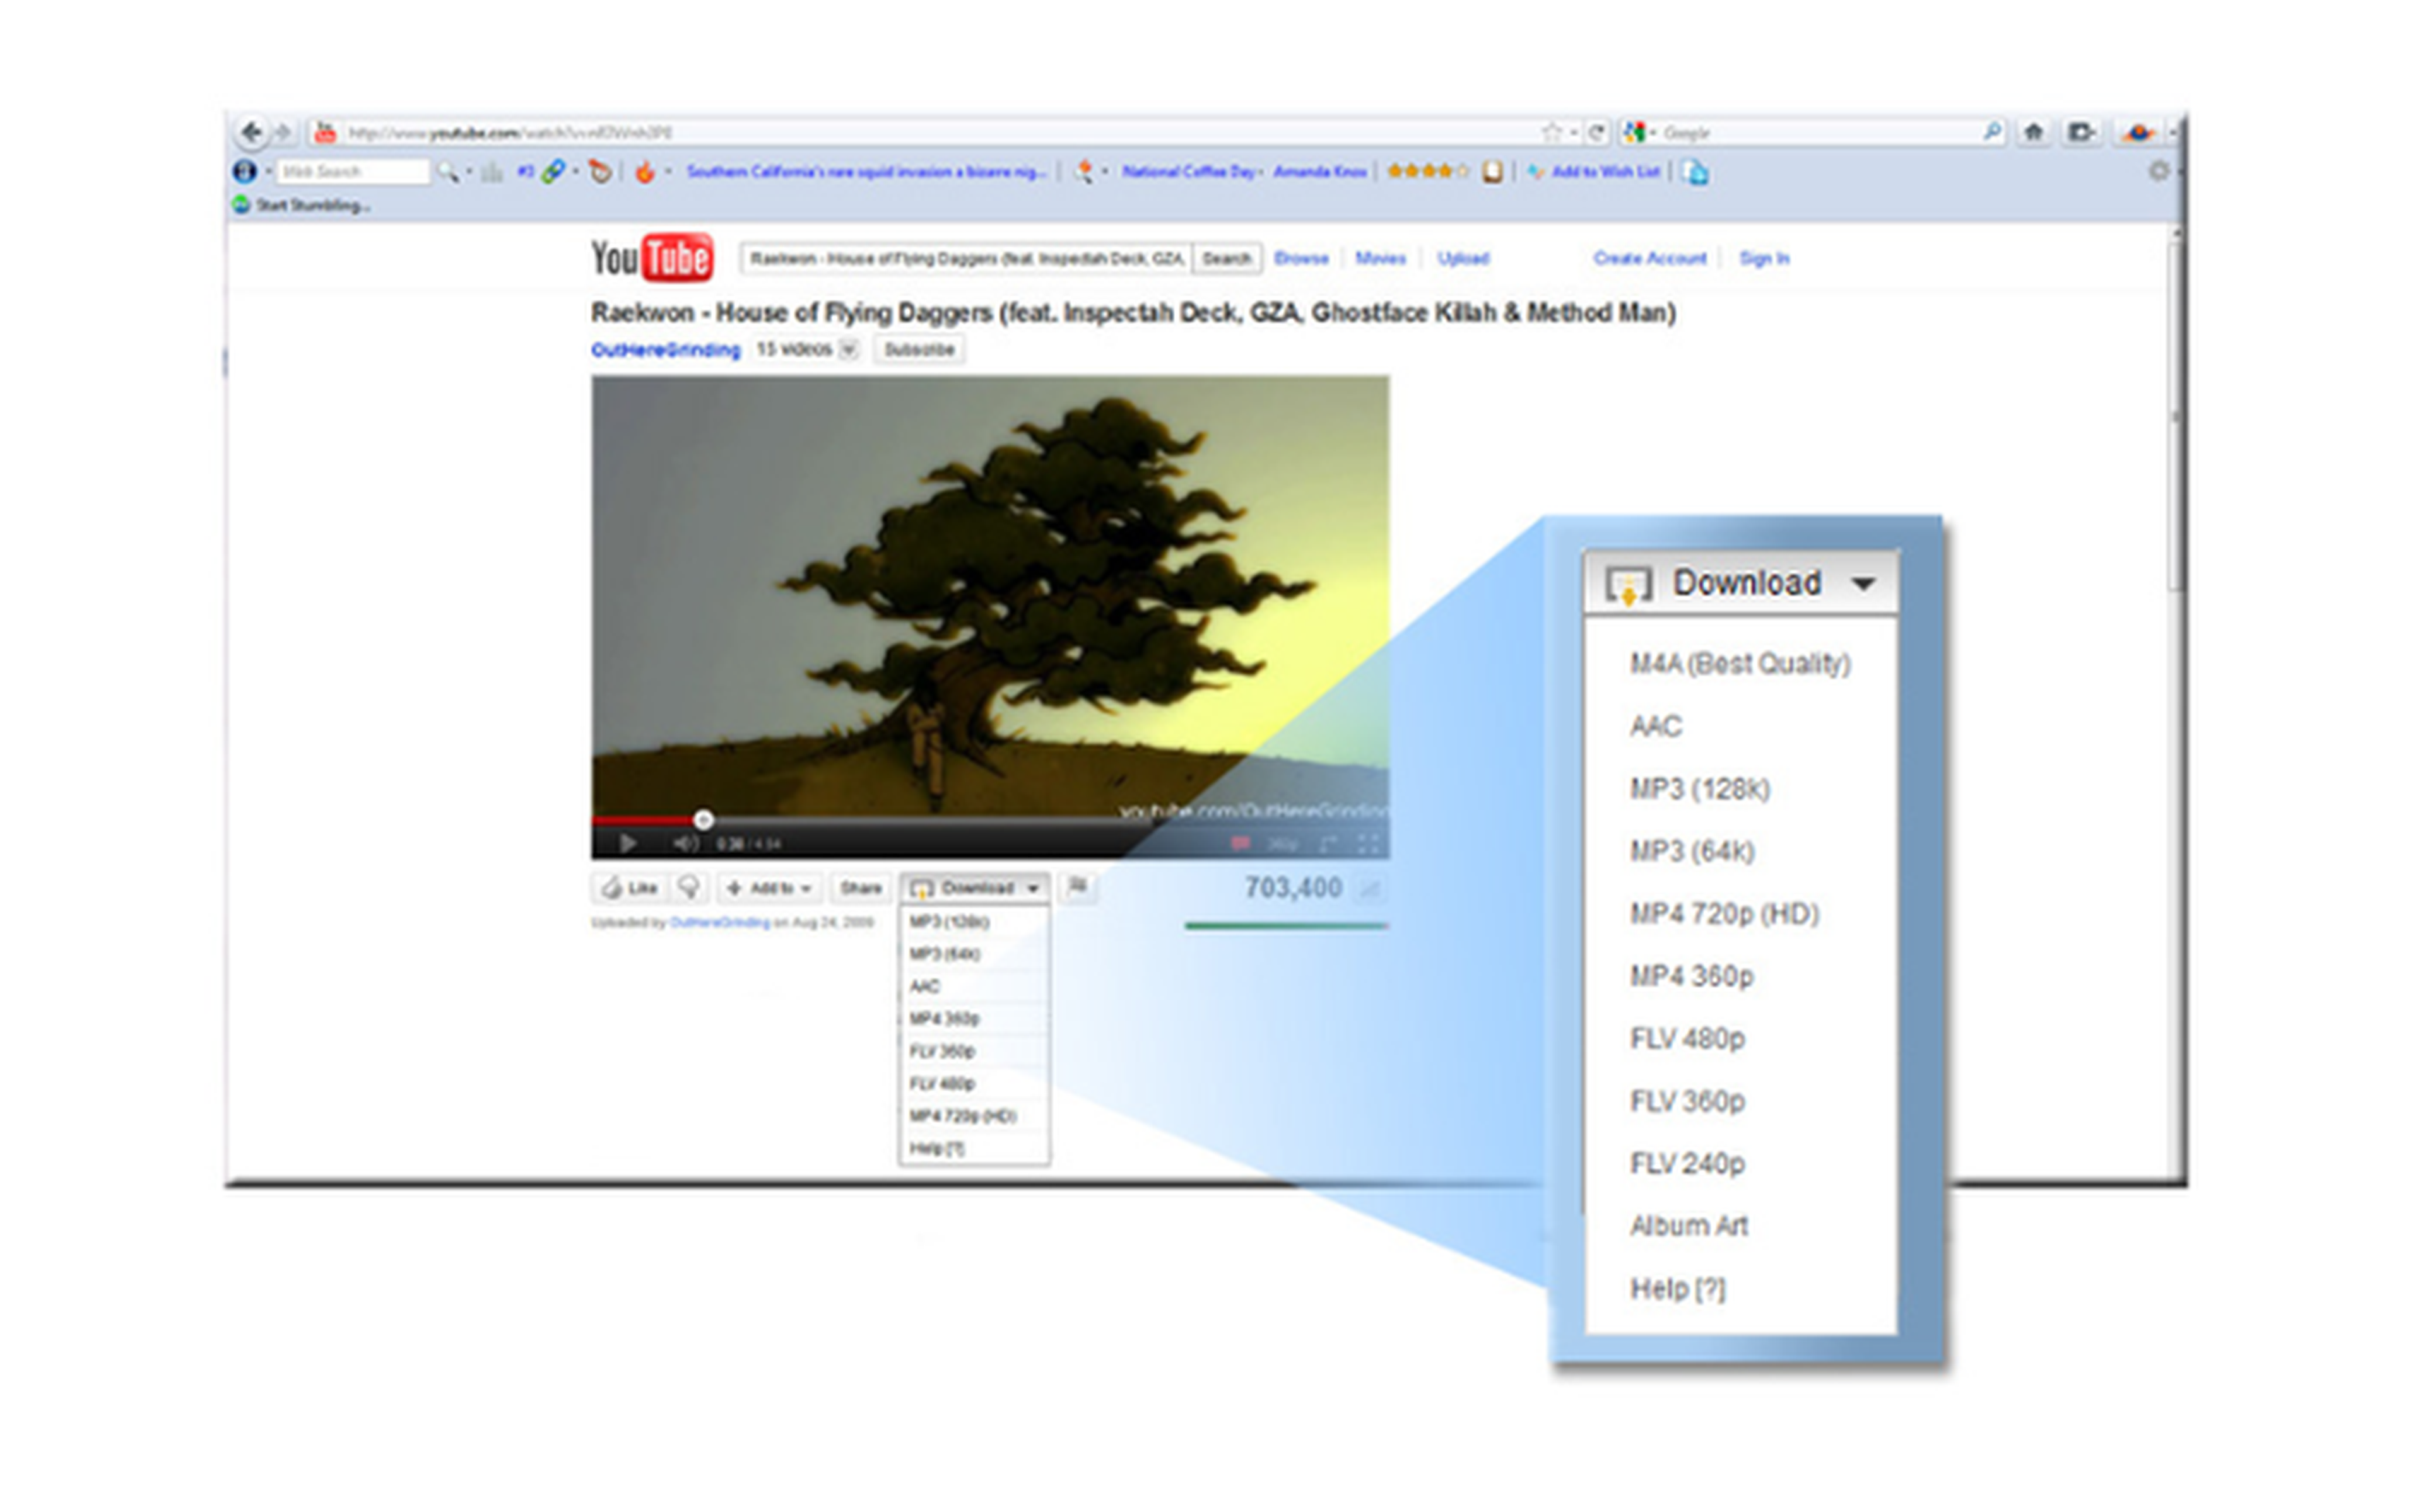 Easy YouTube Video Downloader